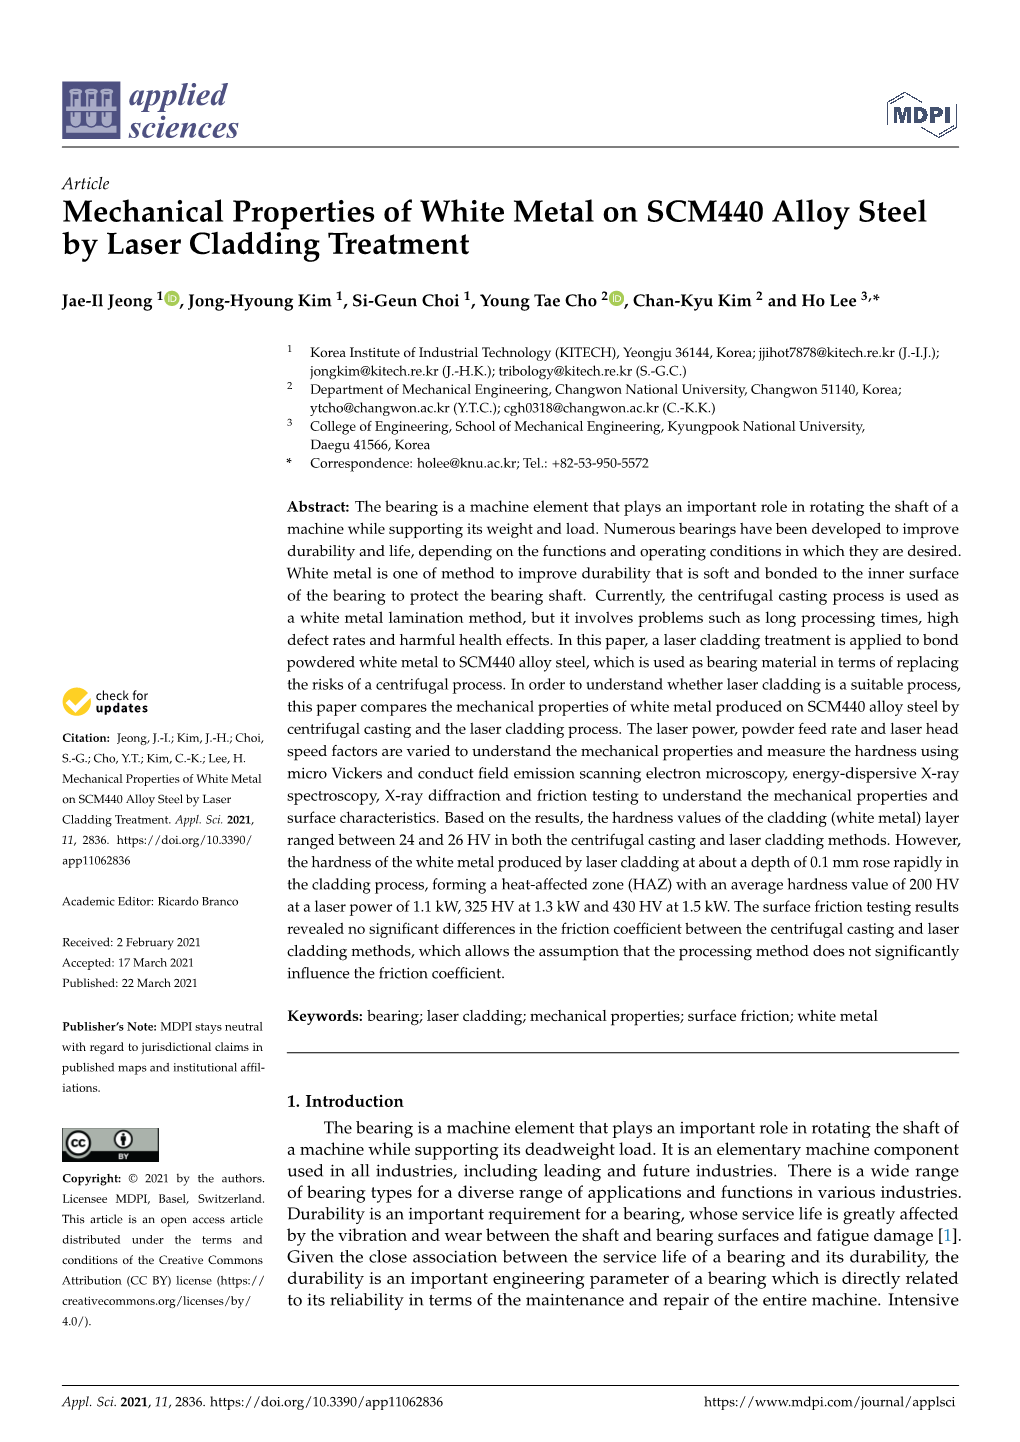 Mechanical Properties of White Metal on SCM440 Alloy Steel by Laser Cladding Treatment